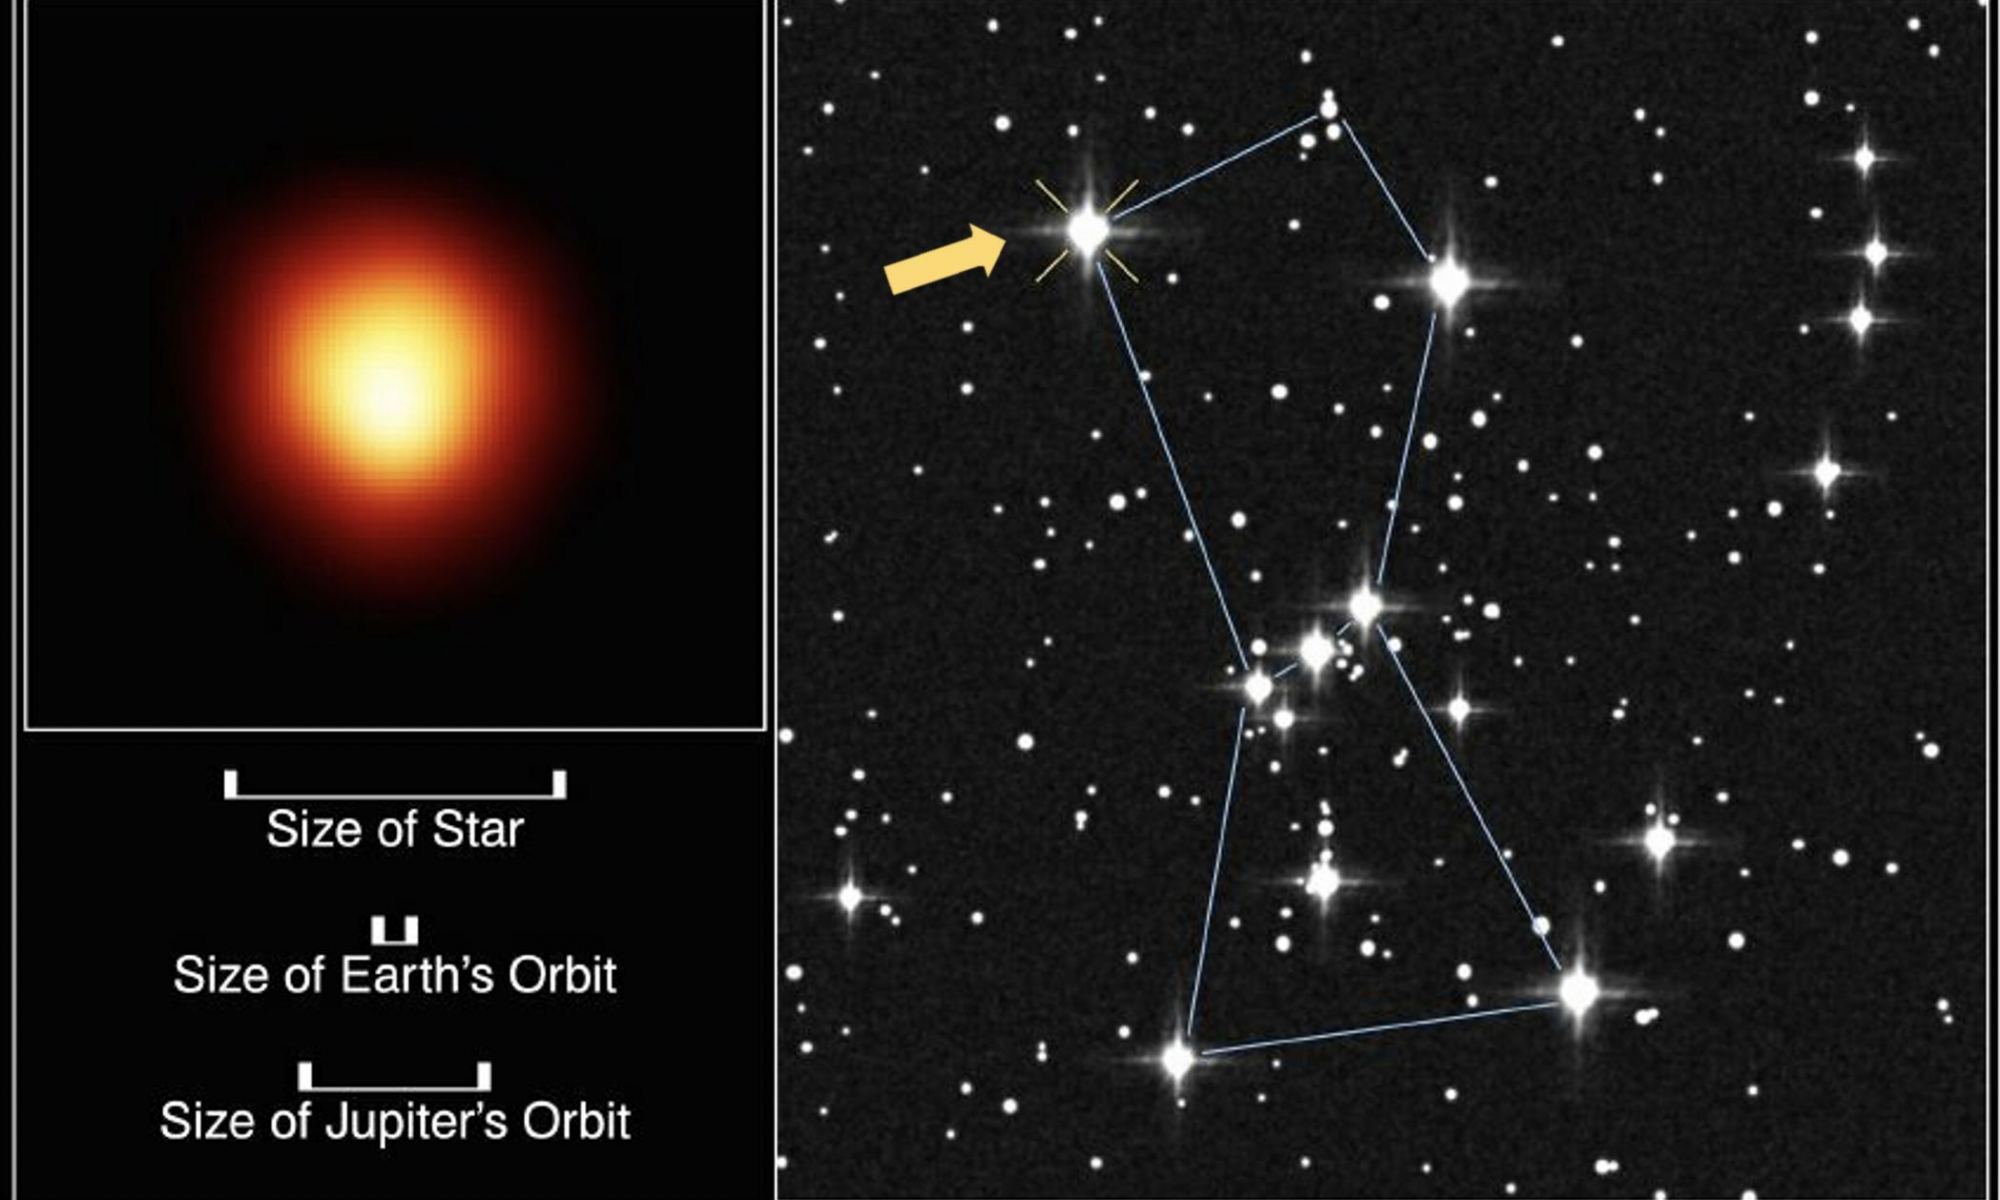 Image of Betelgeuse and graphic showing its location